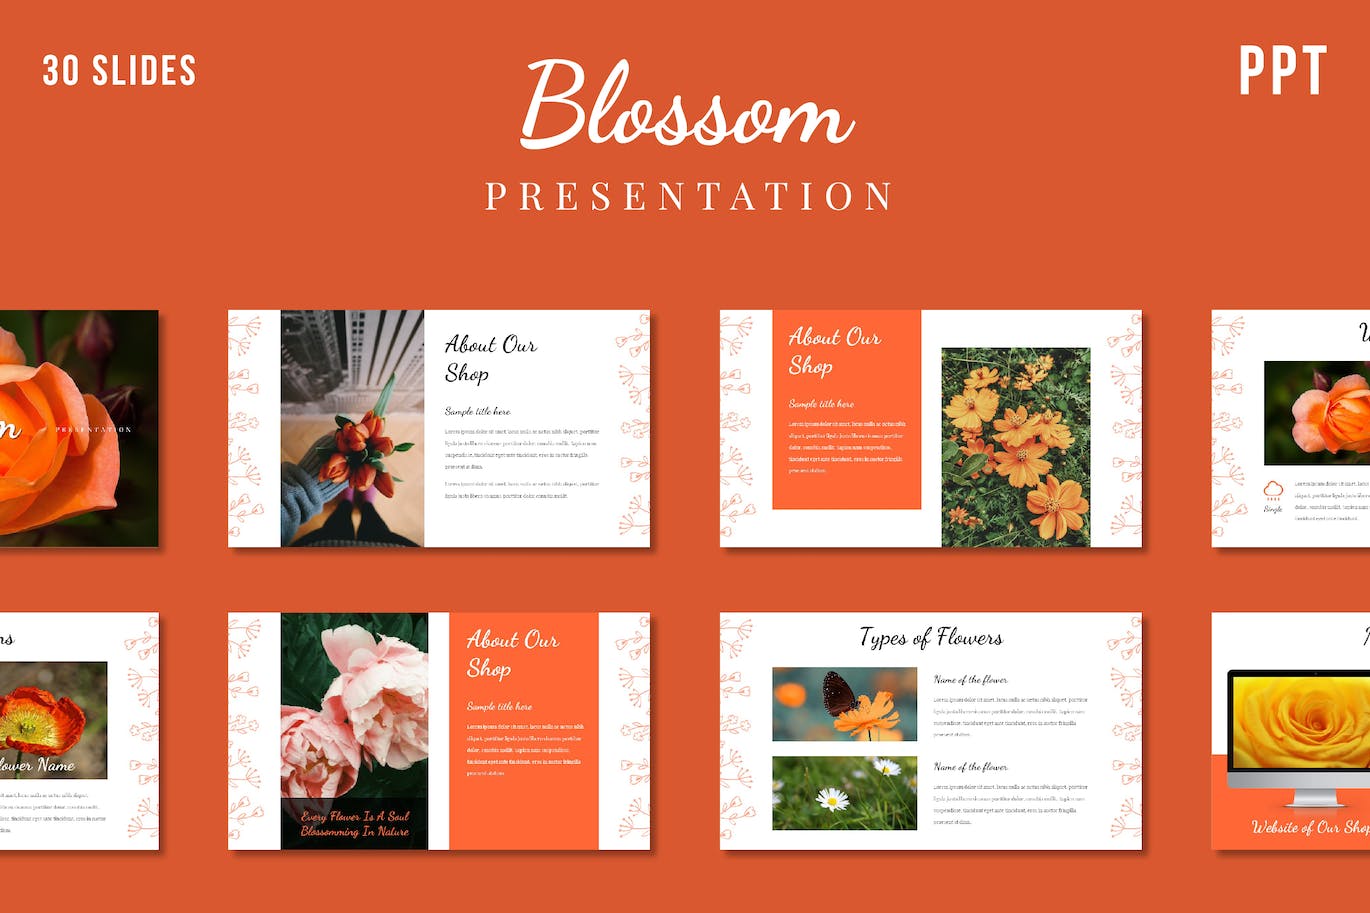 Collection of images of colorful presentation template slides on the theme of flowers.